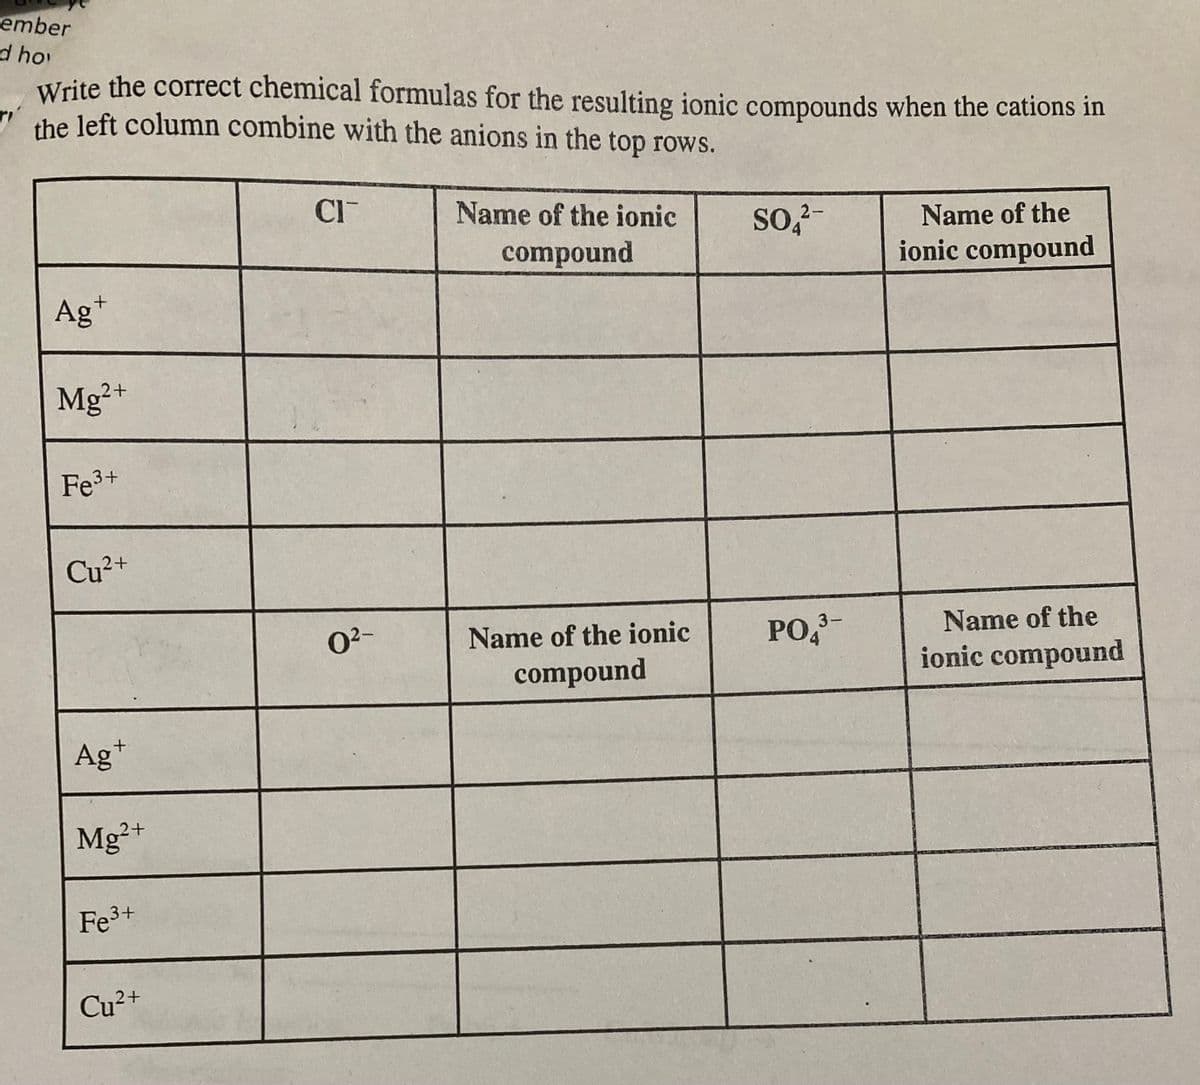 ember
d ho
Write the correct chemical formulas for the resulting ionic compounds when the cations in
the left column combine with the anions in the top rows.
Ag+
Mg2+
Fe³+
2+
Cu²+
Ag+
Mg2+
Fe³+
Cu²+
CI
0²-
Name of the ionic
compound
Name of the ionic
compound
2-
SO²-
3-
PO ³-
Name of the
ionic compound
Name of the
ionic compound